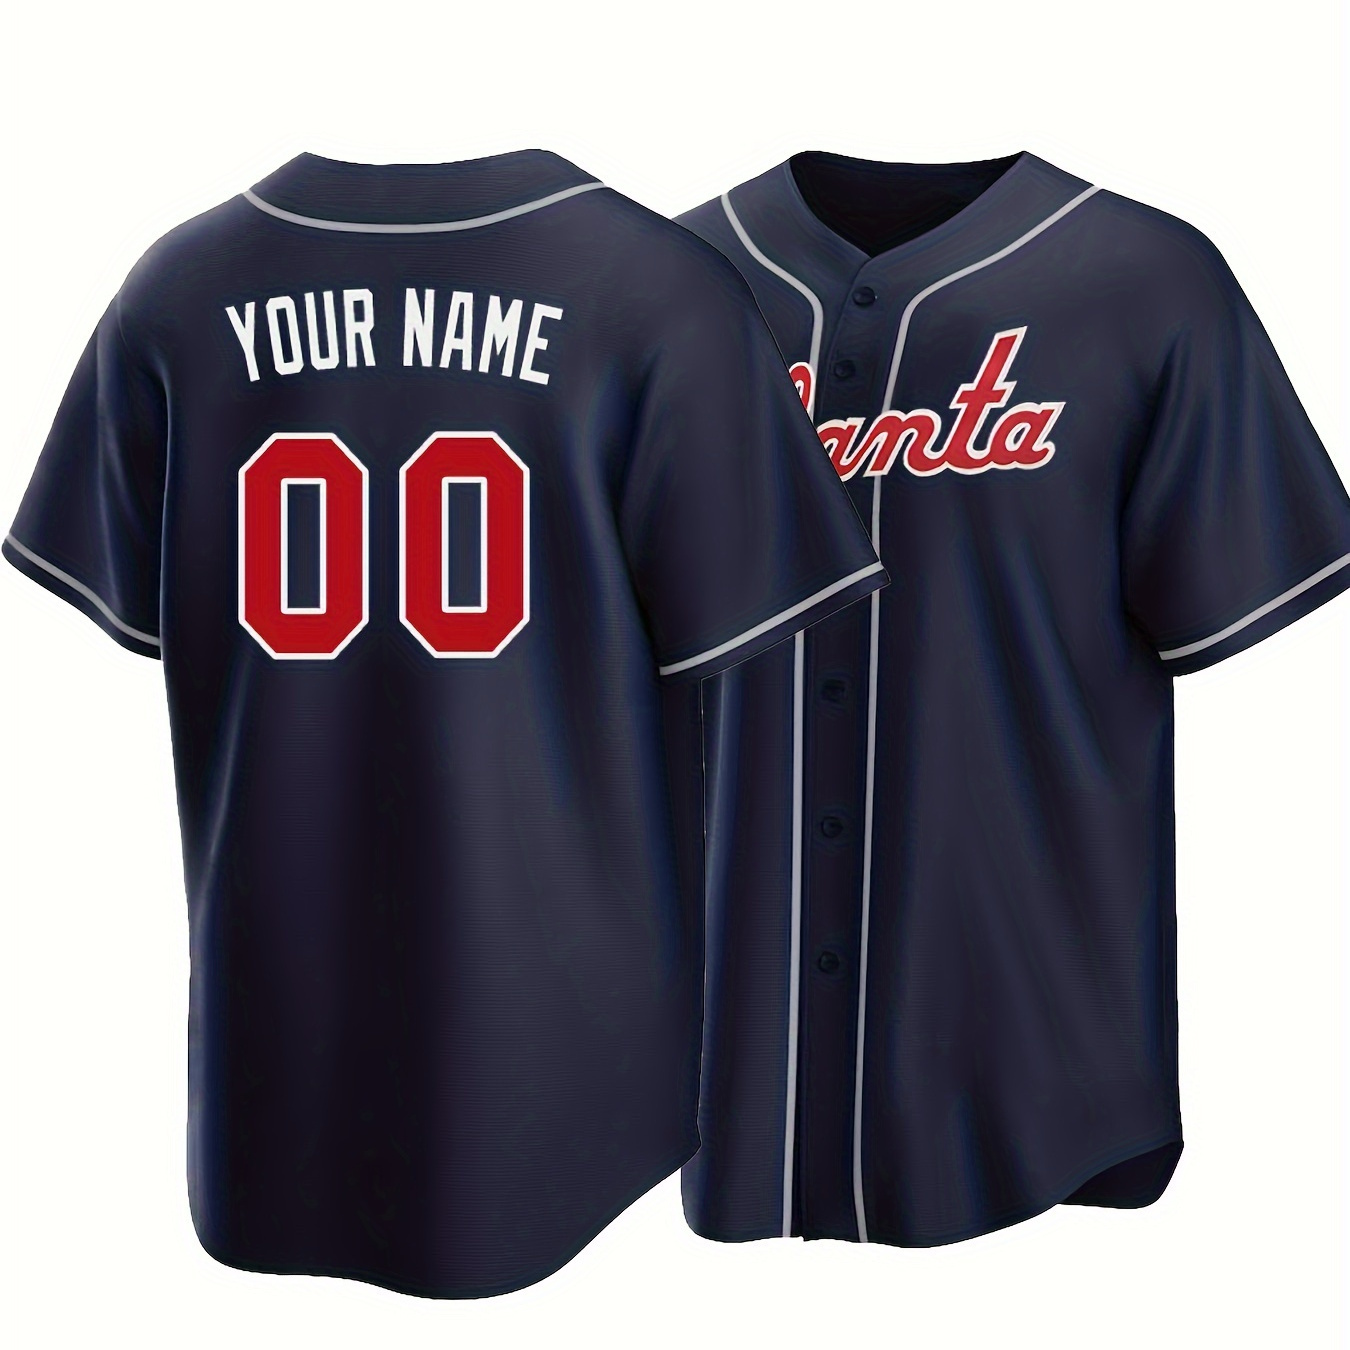 

Customized Name And Number, Men's V-neck Baseball Jersey, Comfy Top For Training And Competition